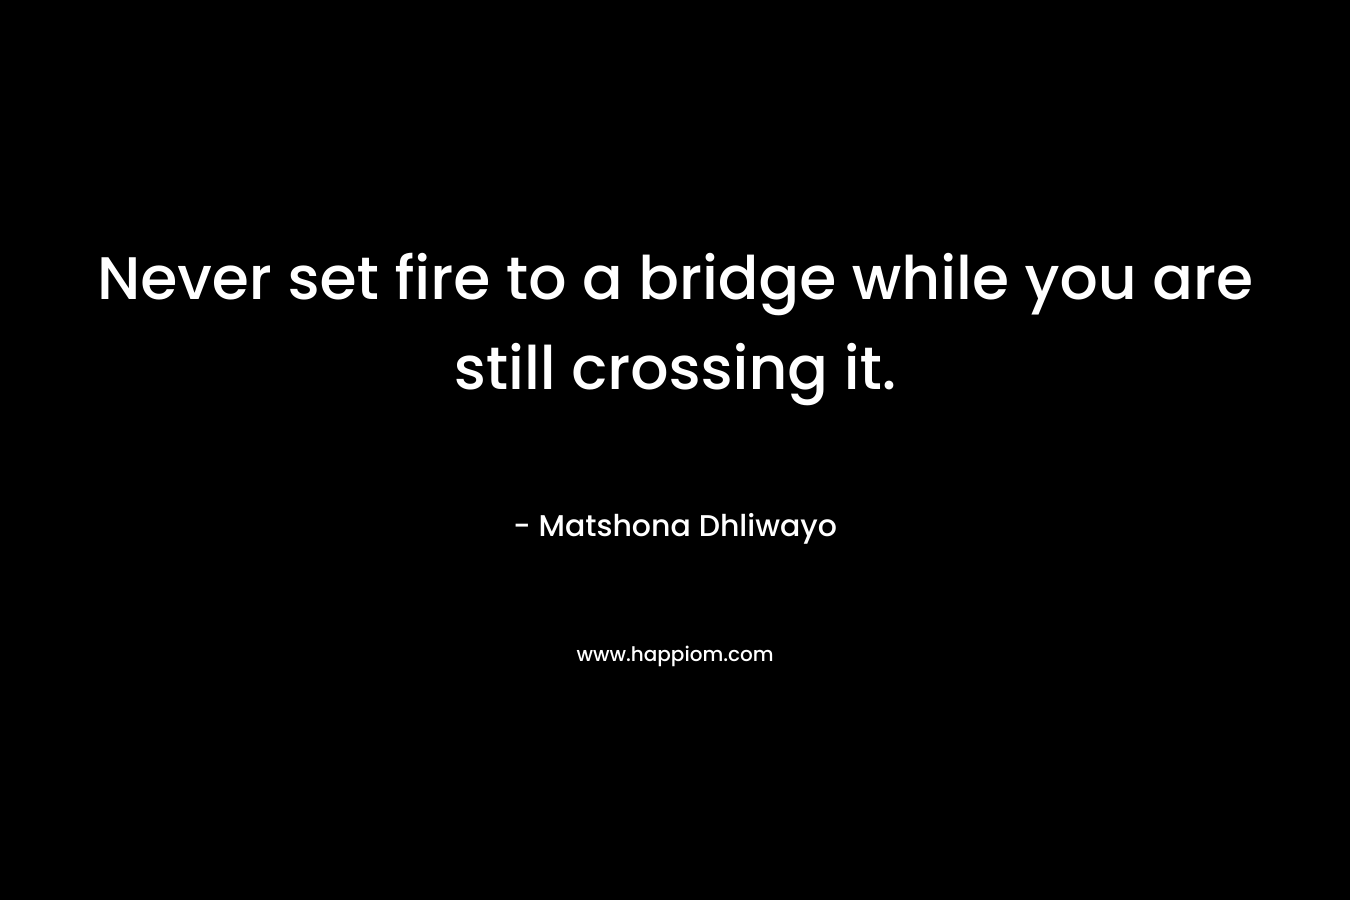 Never set fire to a bridge while you are still crossing it. – Matshona Dhliwayo